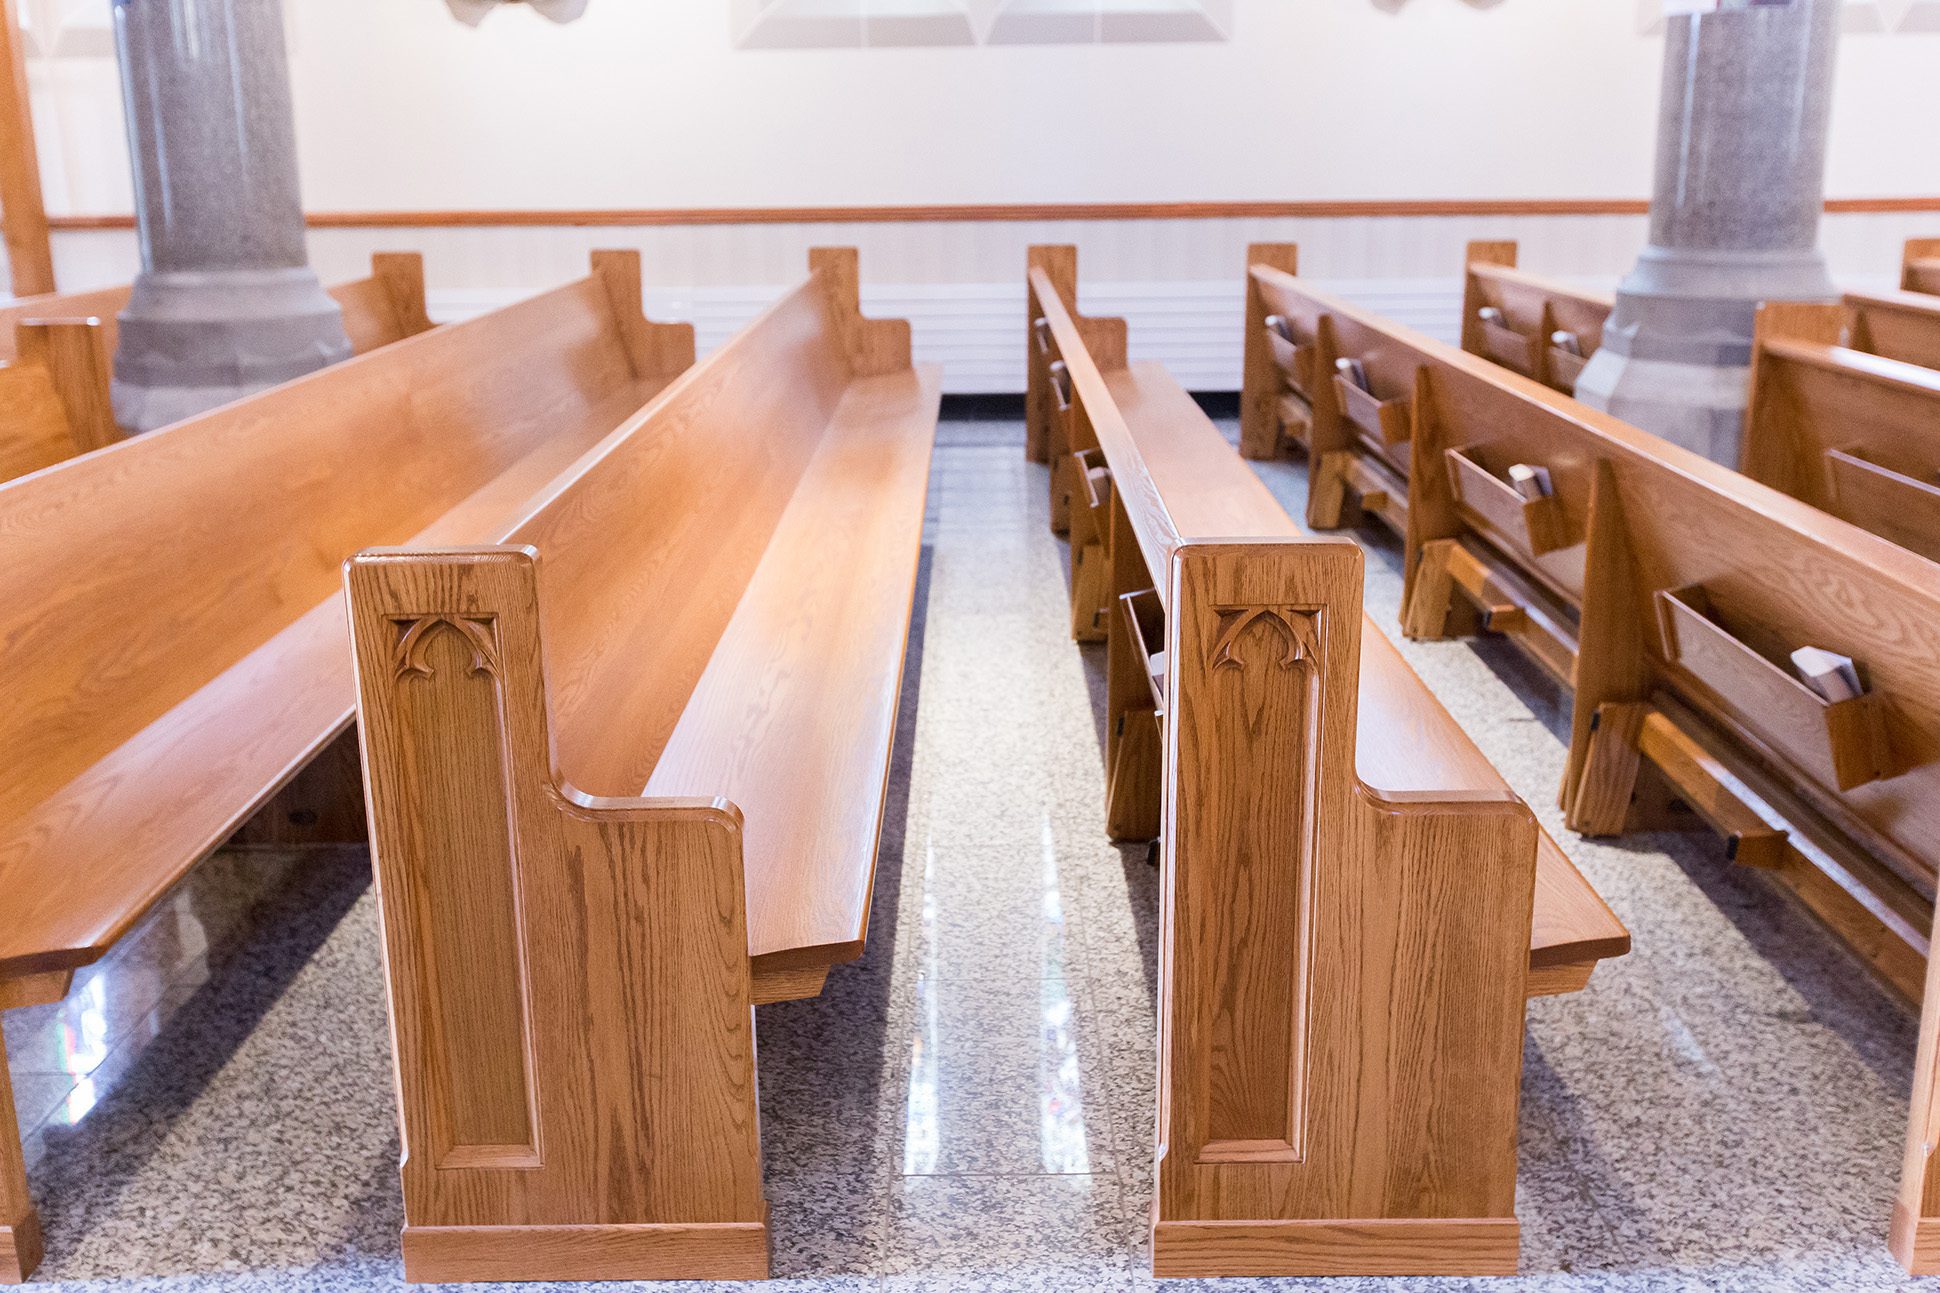 Straight wooden pews at St. Mary’s Catholic Church feature ornate pew ends.